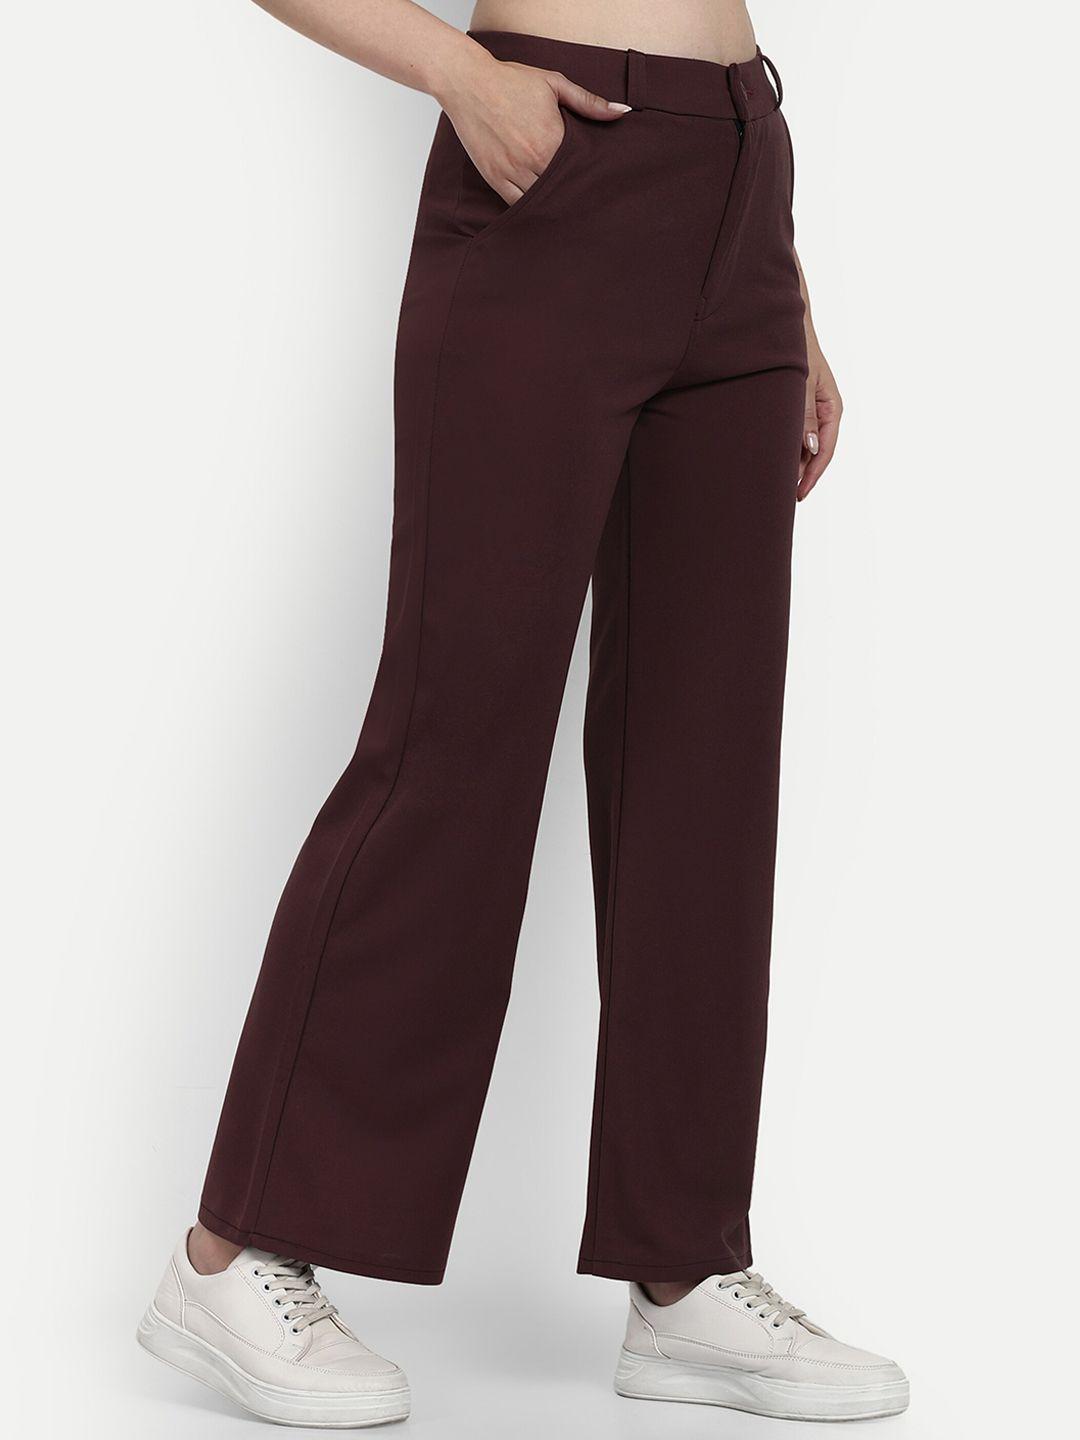 next-one-women-smart-loose-fit-high-rise-easy-wash-stretchable-parallel-trousers